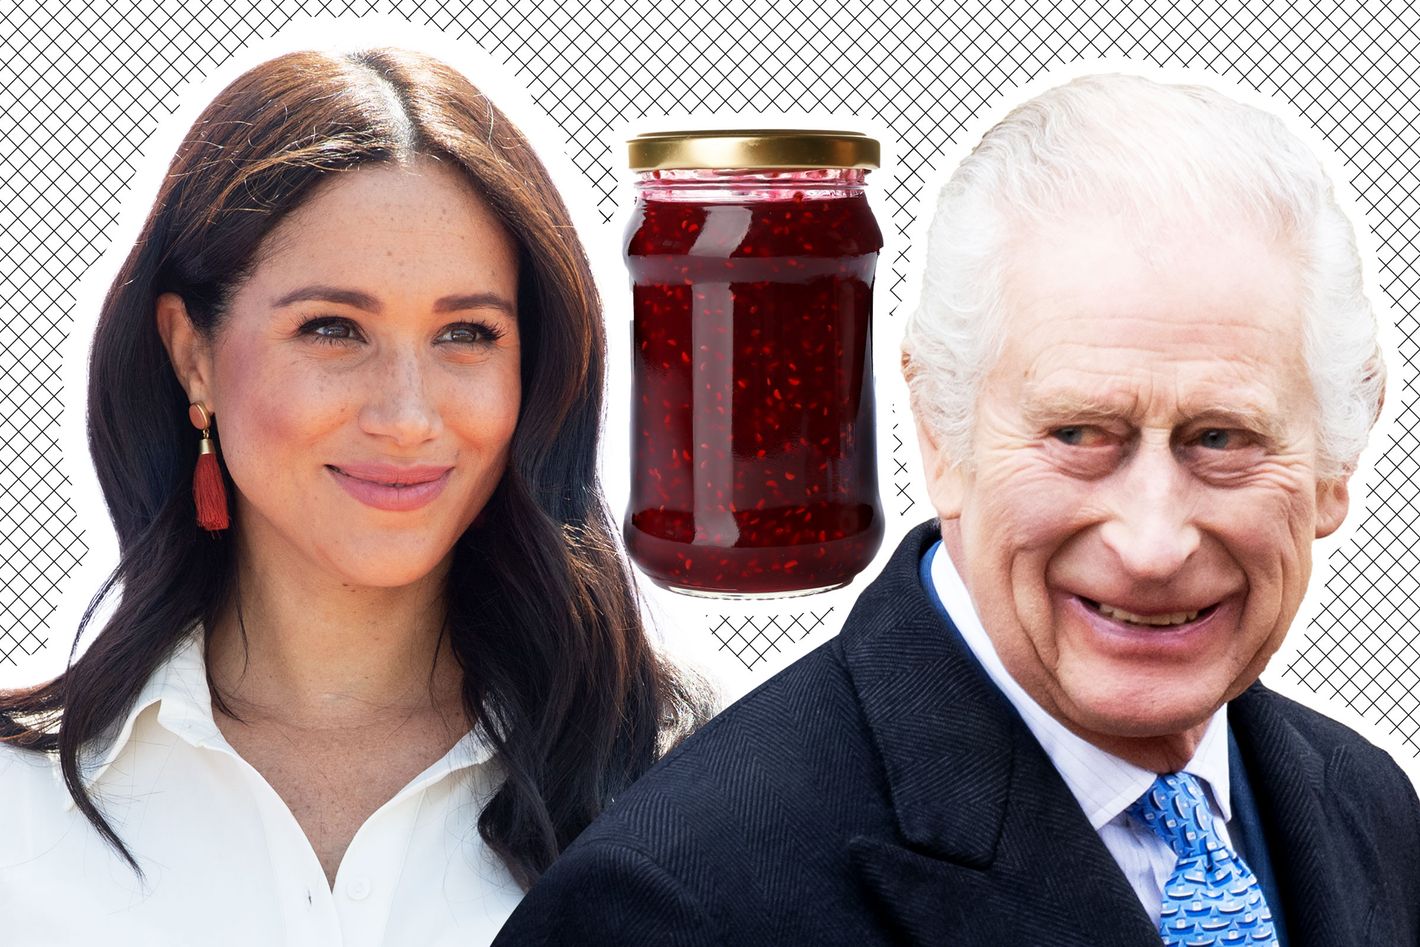 The Royal Jam Wars Are Underway